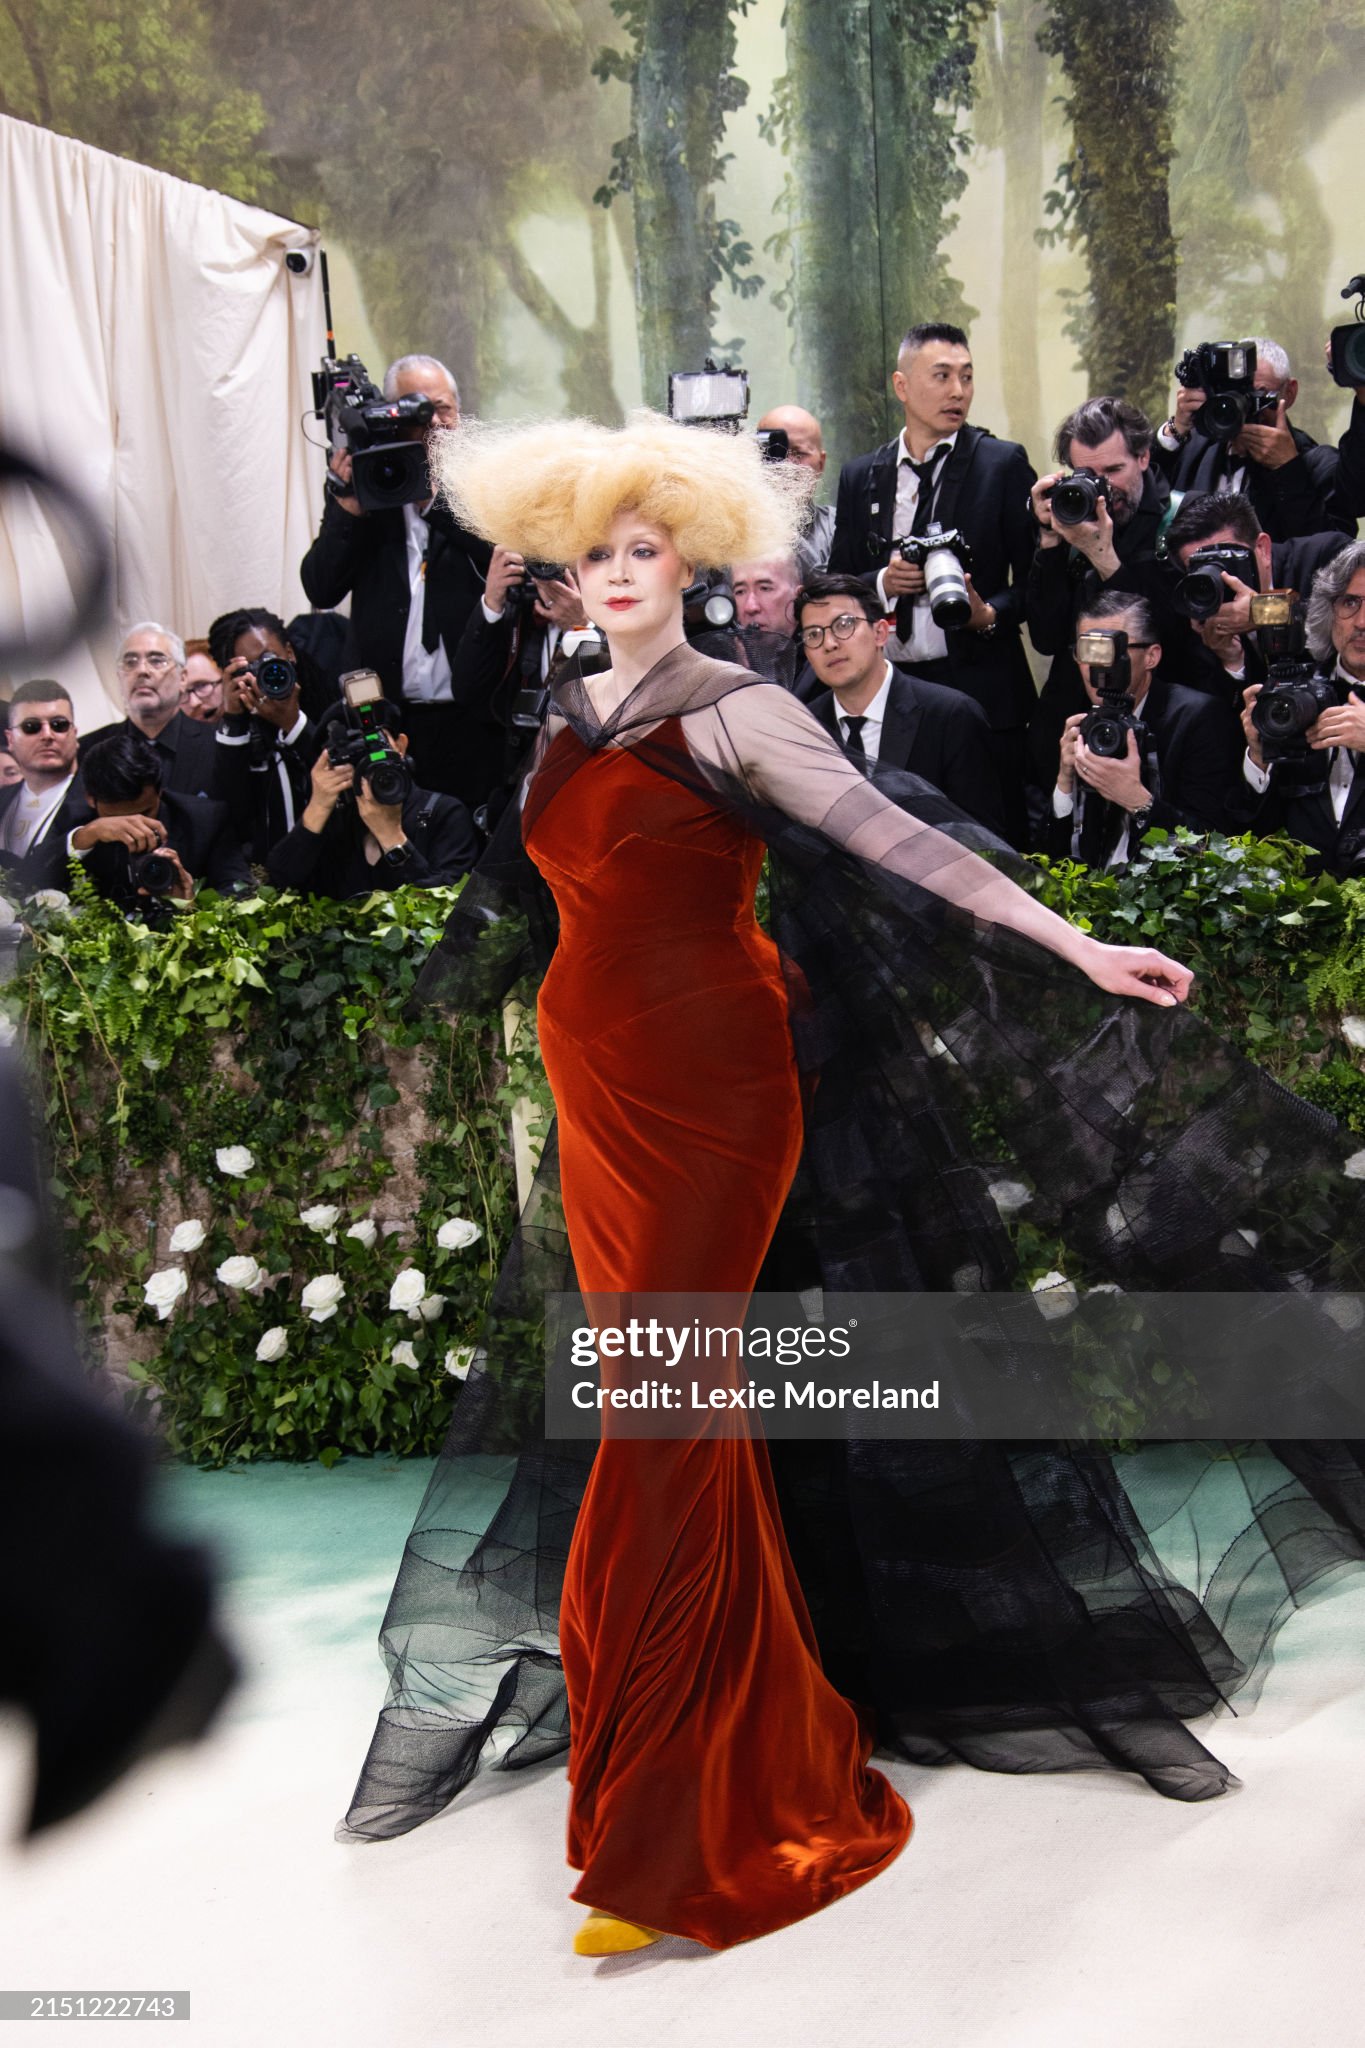 gettyimages-2151222743-2048x2048.jpg